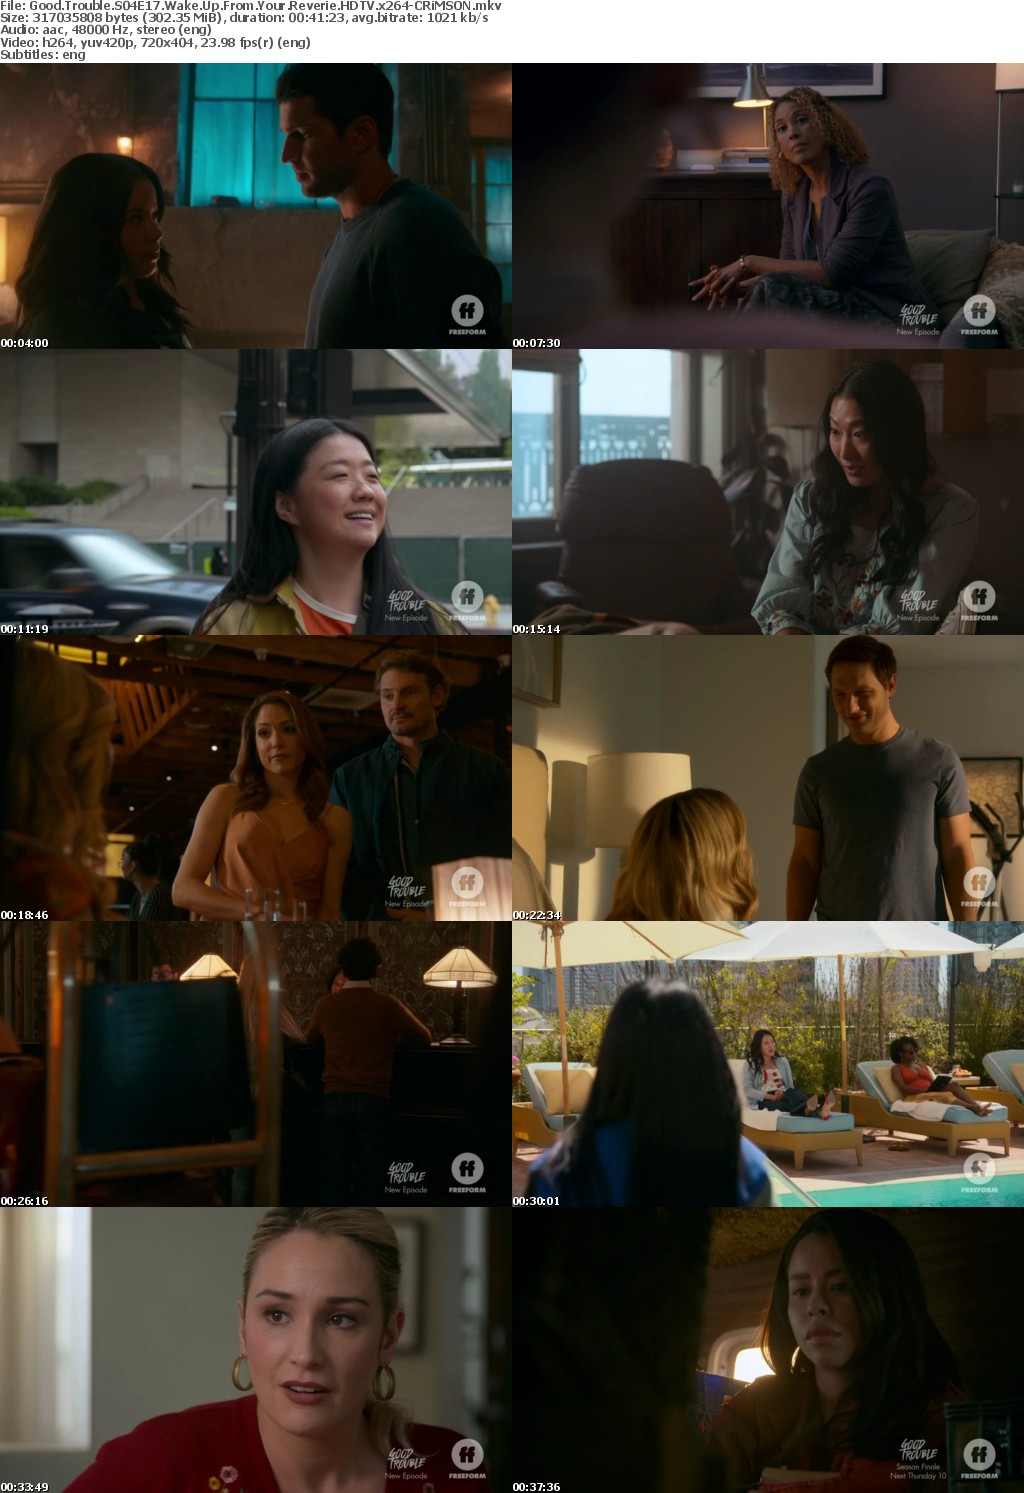 Good Trouble S04E17 Wake Up From Your Reverie HDTV x264-CRiMSON